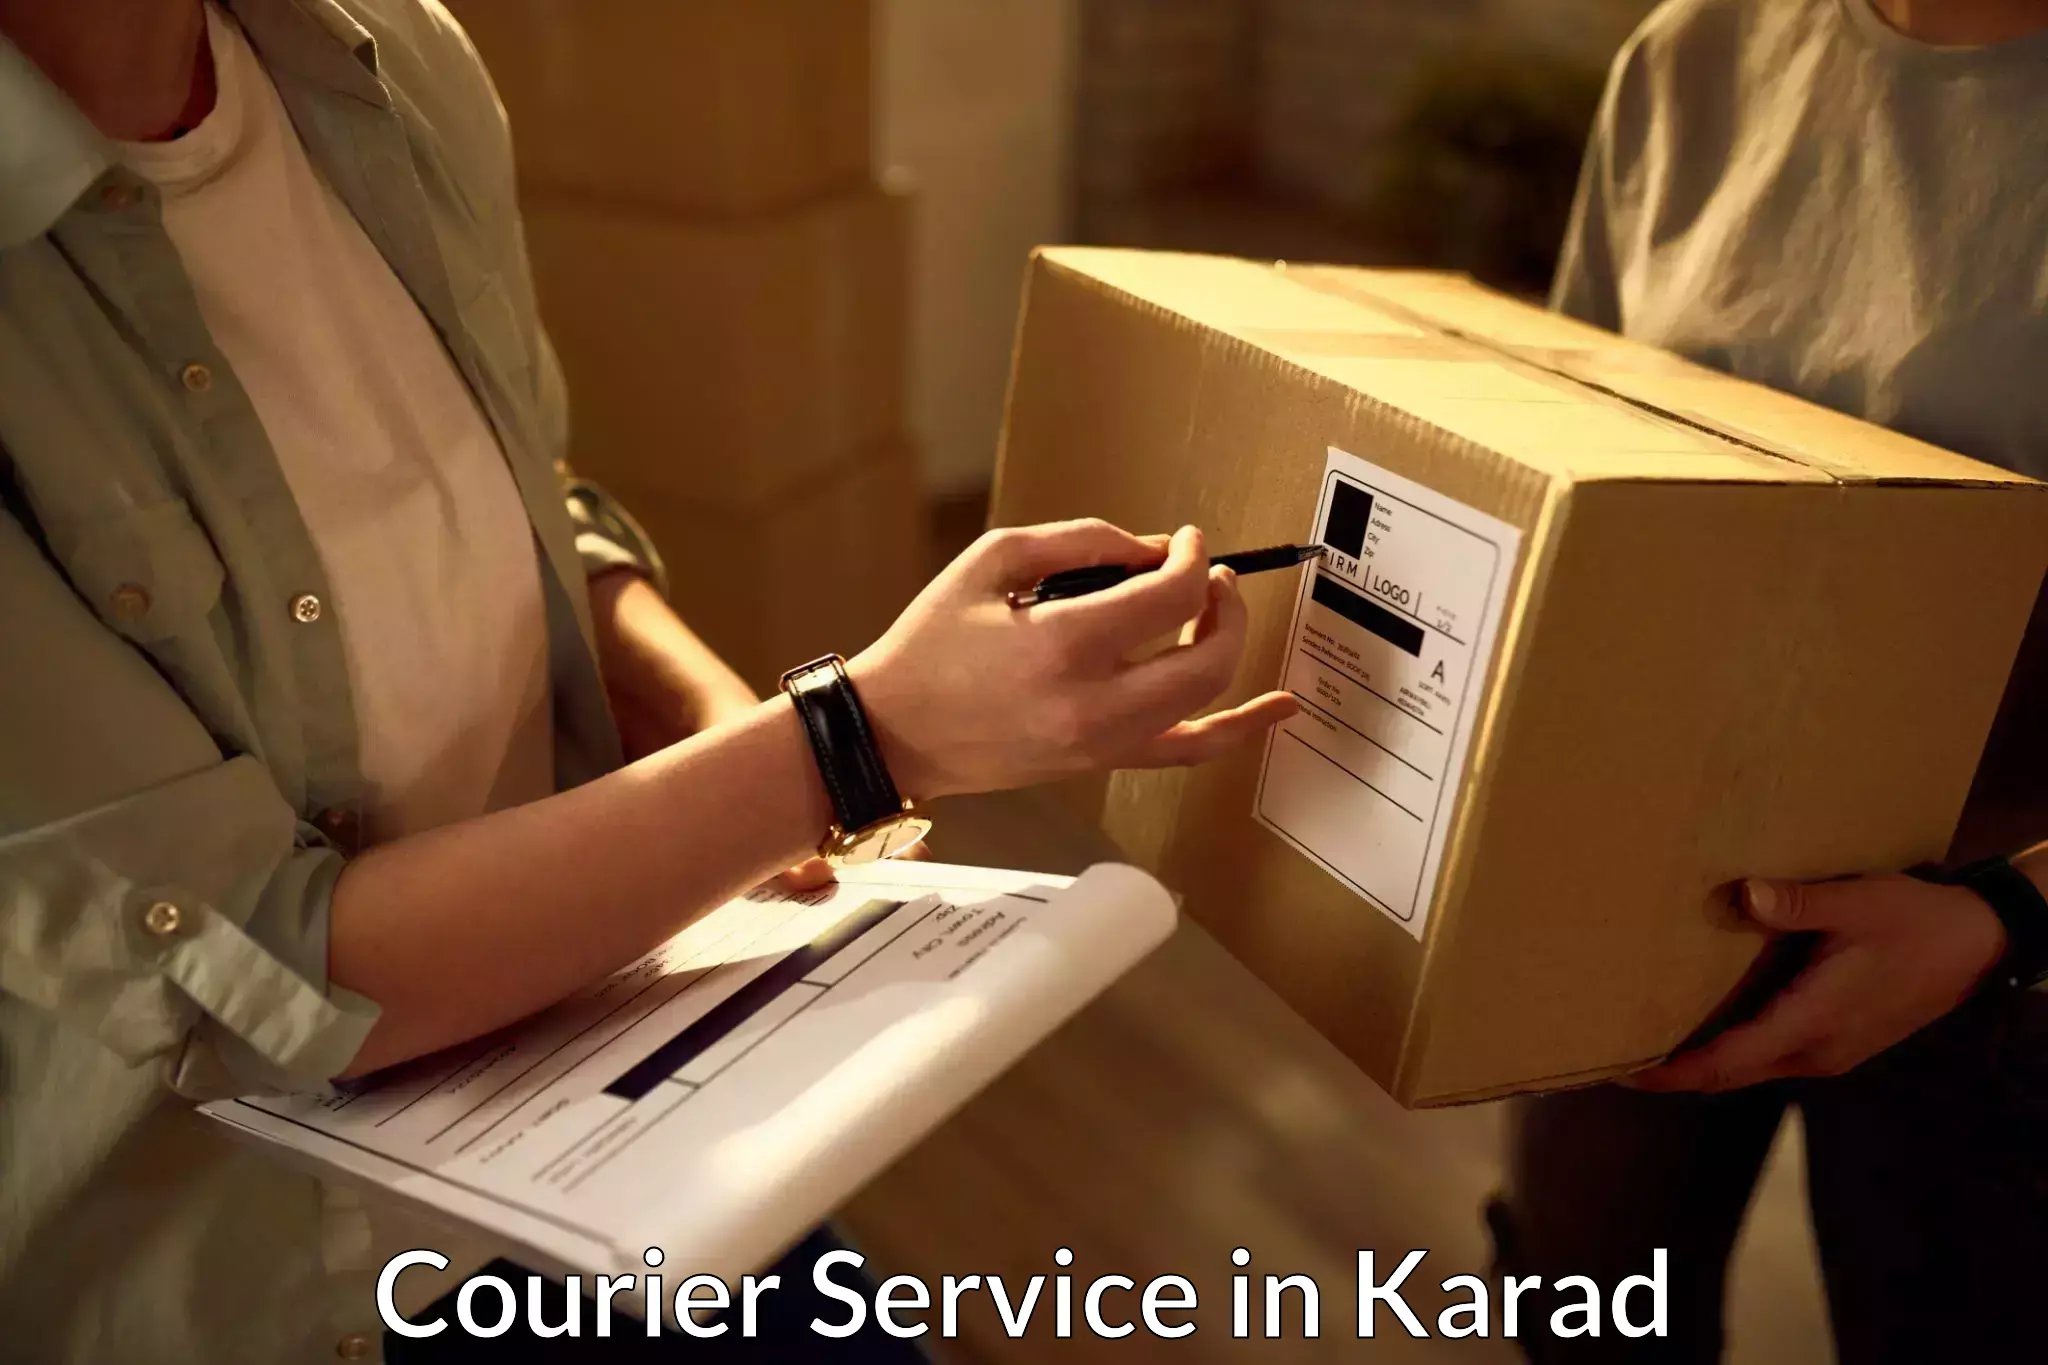 Overnight delivery services in Karad